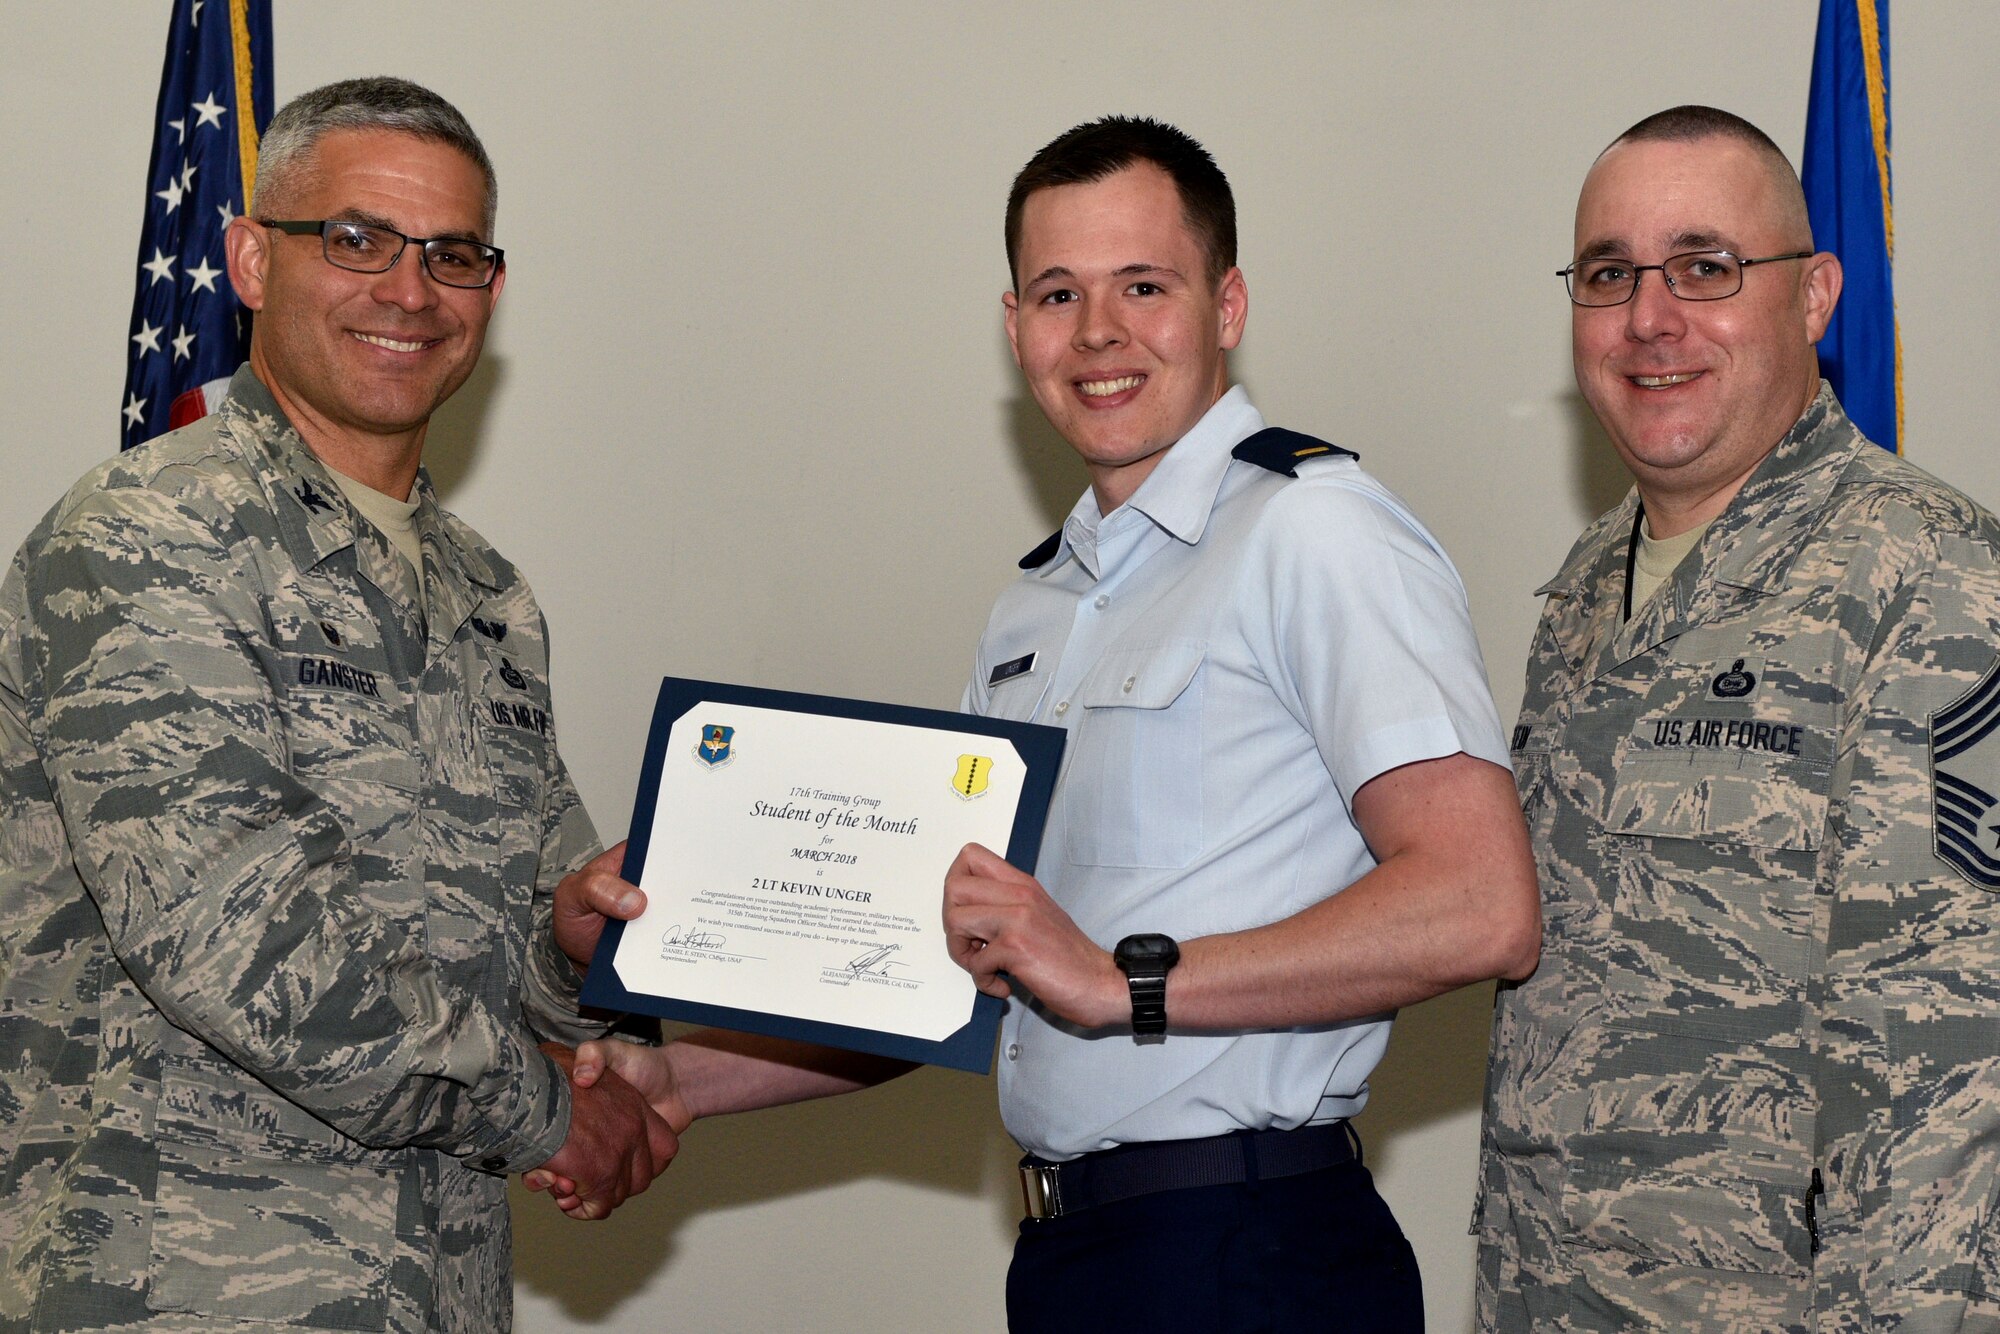 U.S. Air Force Col. Alex Ganster, 17th Training Group commander, and Chief Master Sgt. Daniel Stein, 17th TRG superintendent, present the 315th Training Squadron Officer Student of the Month certificate to 2nd Lt. Kevin Unger, 315th TRS trainee, in the Event Center on Goodfellow Air Force Base, Texas, April 6, 2018. The 315th TRS’s vision is to develop combat-ready intelligence, surveillance and reconnaissance professionals and promote an innovative squadron culture and identity unmatched across the U.S. Air Force. (U.S. Air Force photo by Senior Airman Randall Moose/Released)